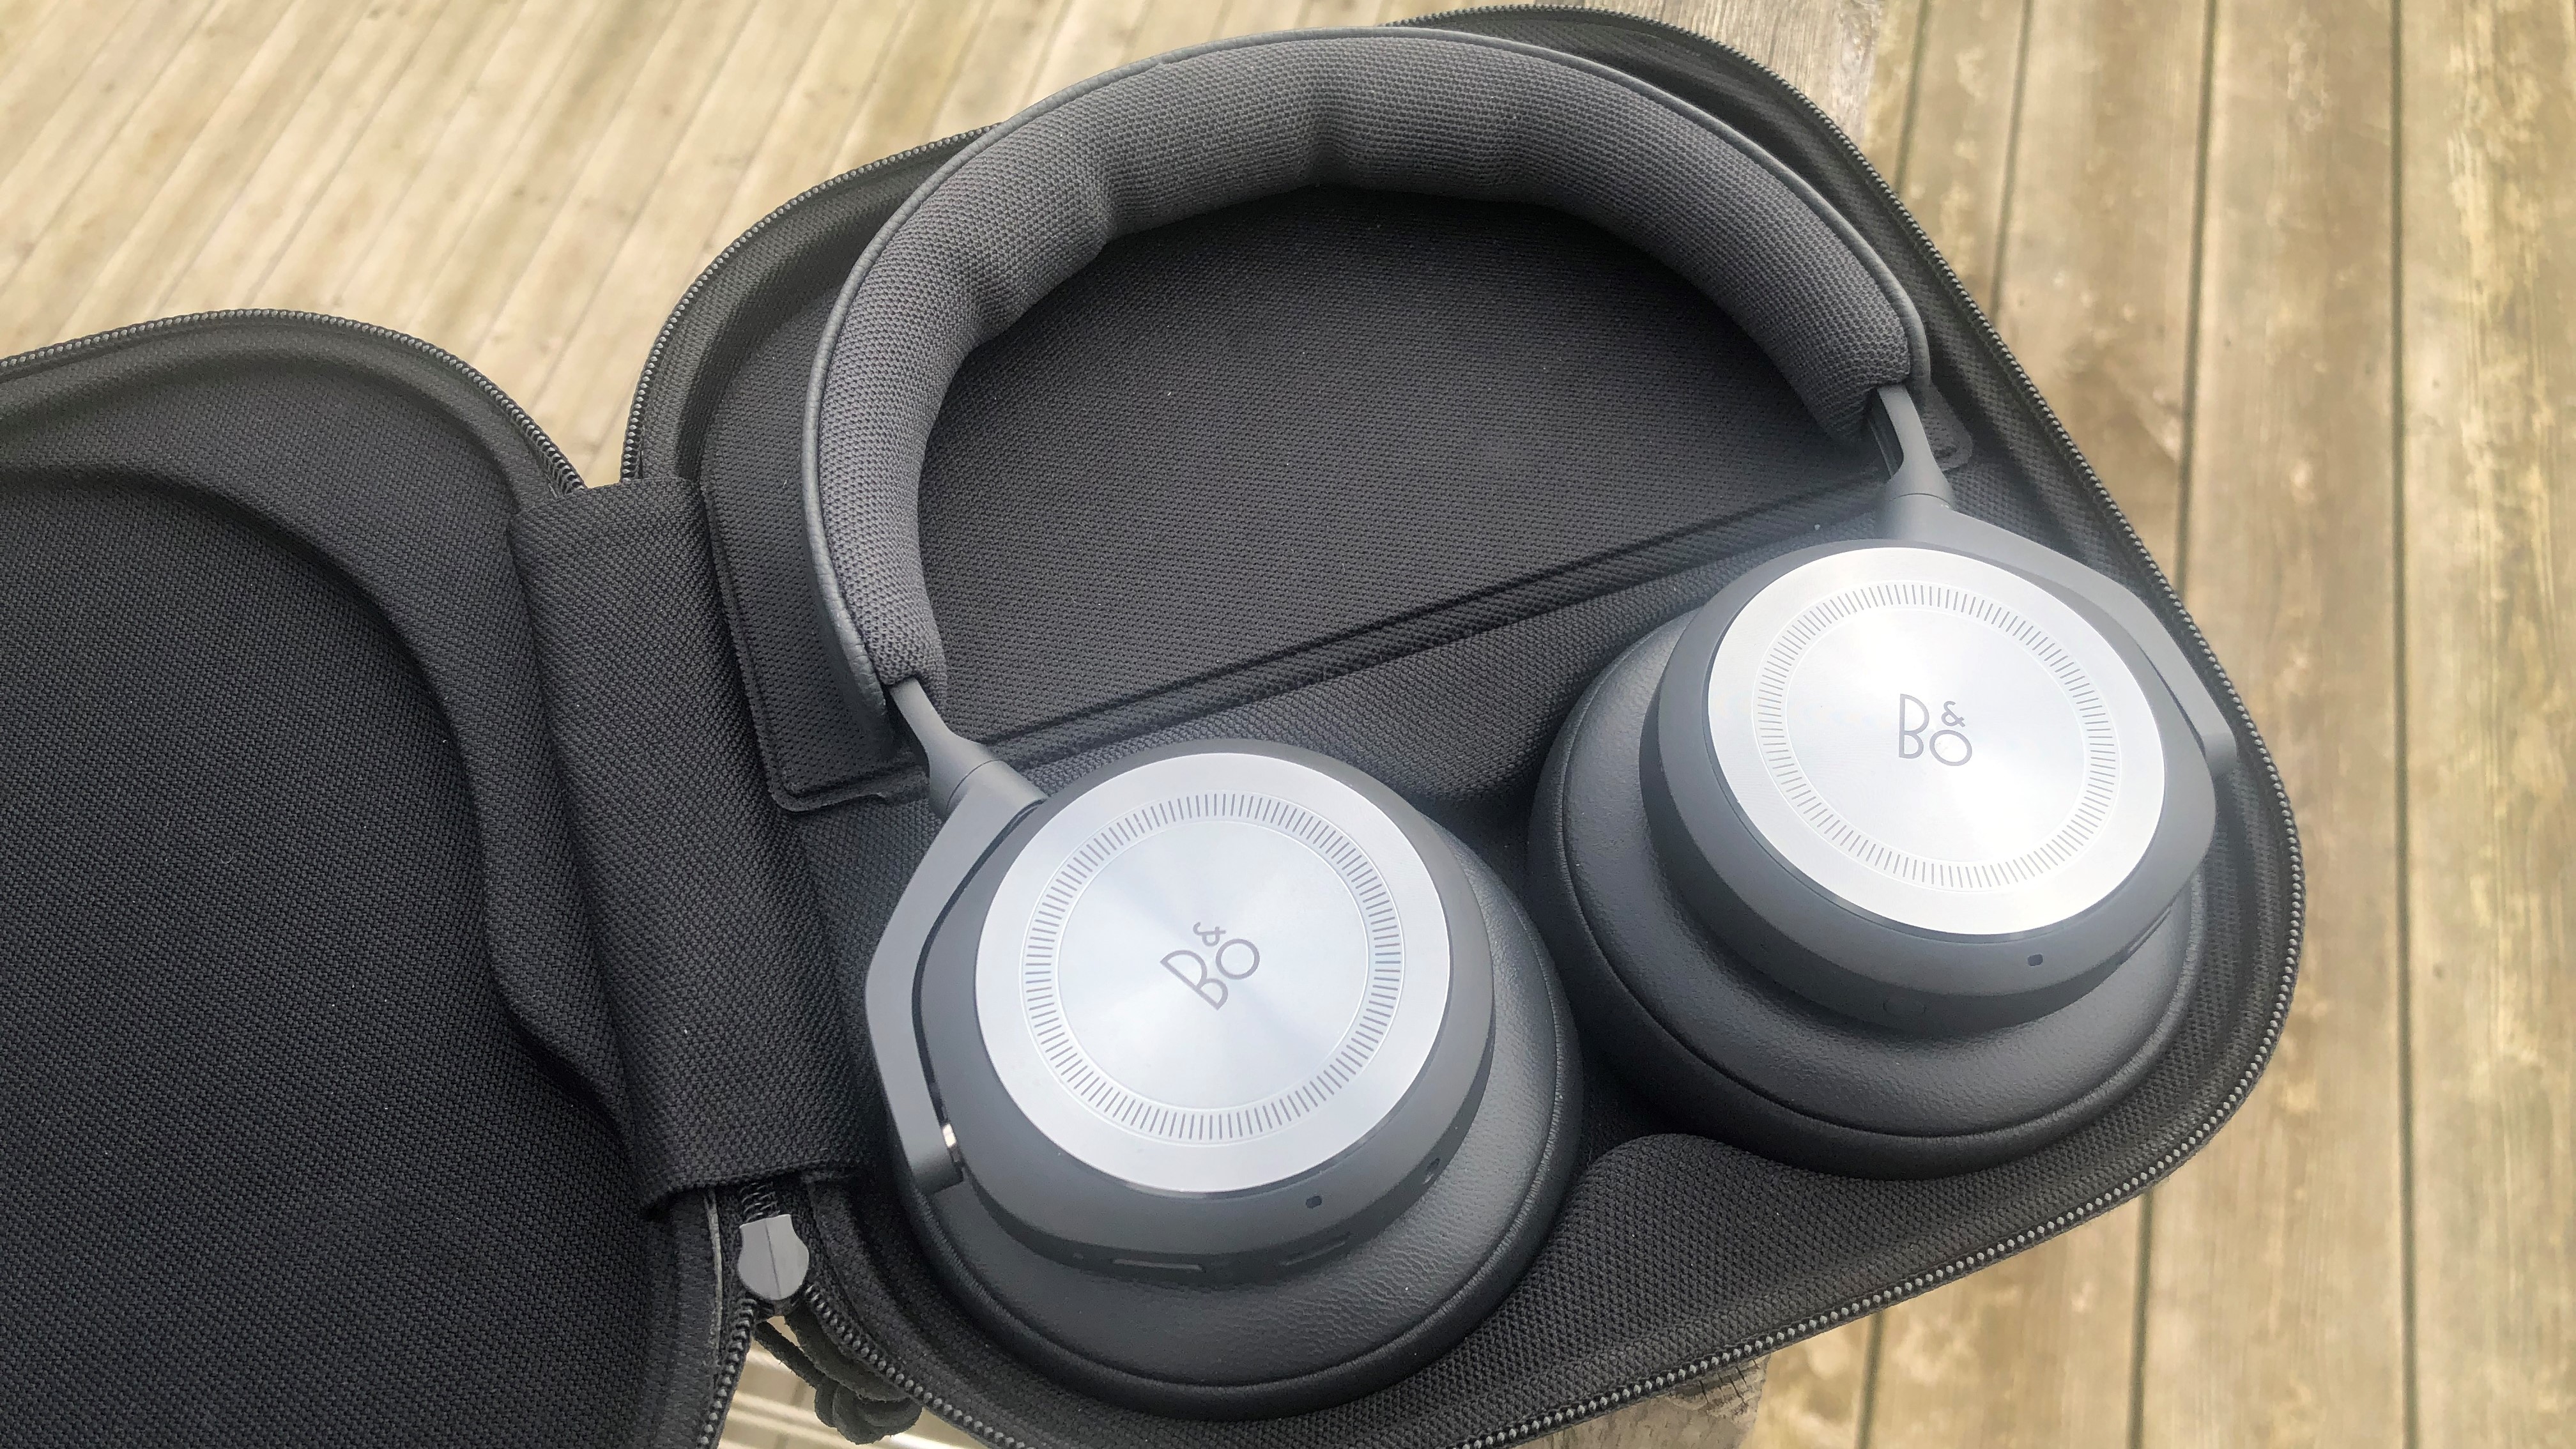 Bang & Beoplay HX Classy sound in style | Tom's Guide